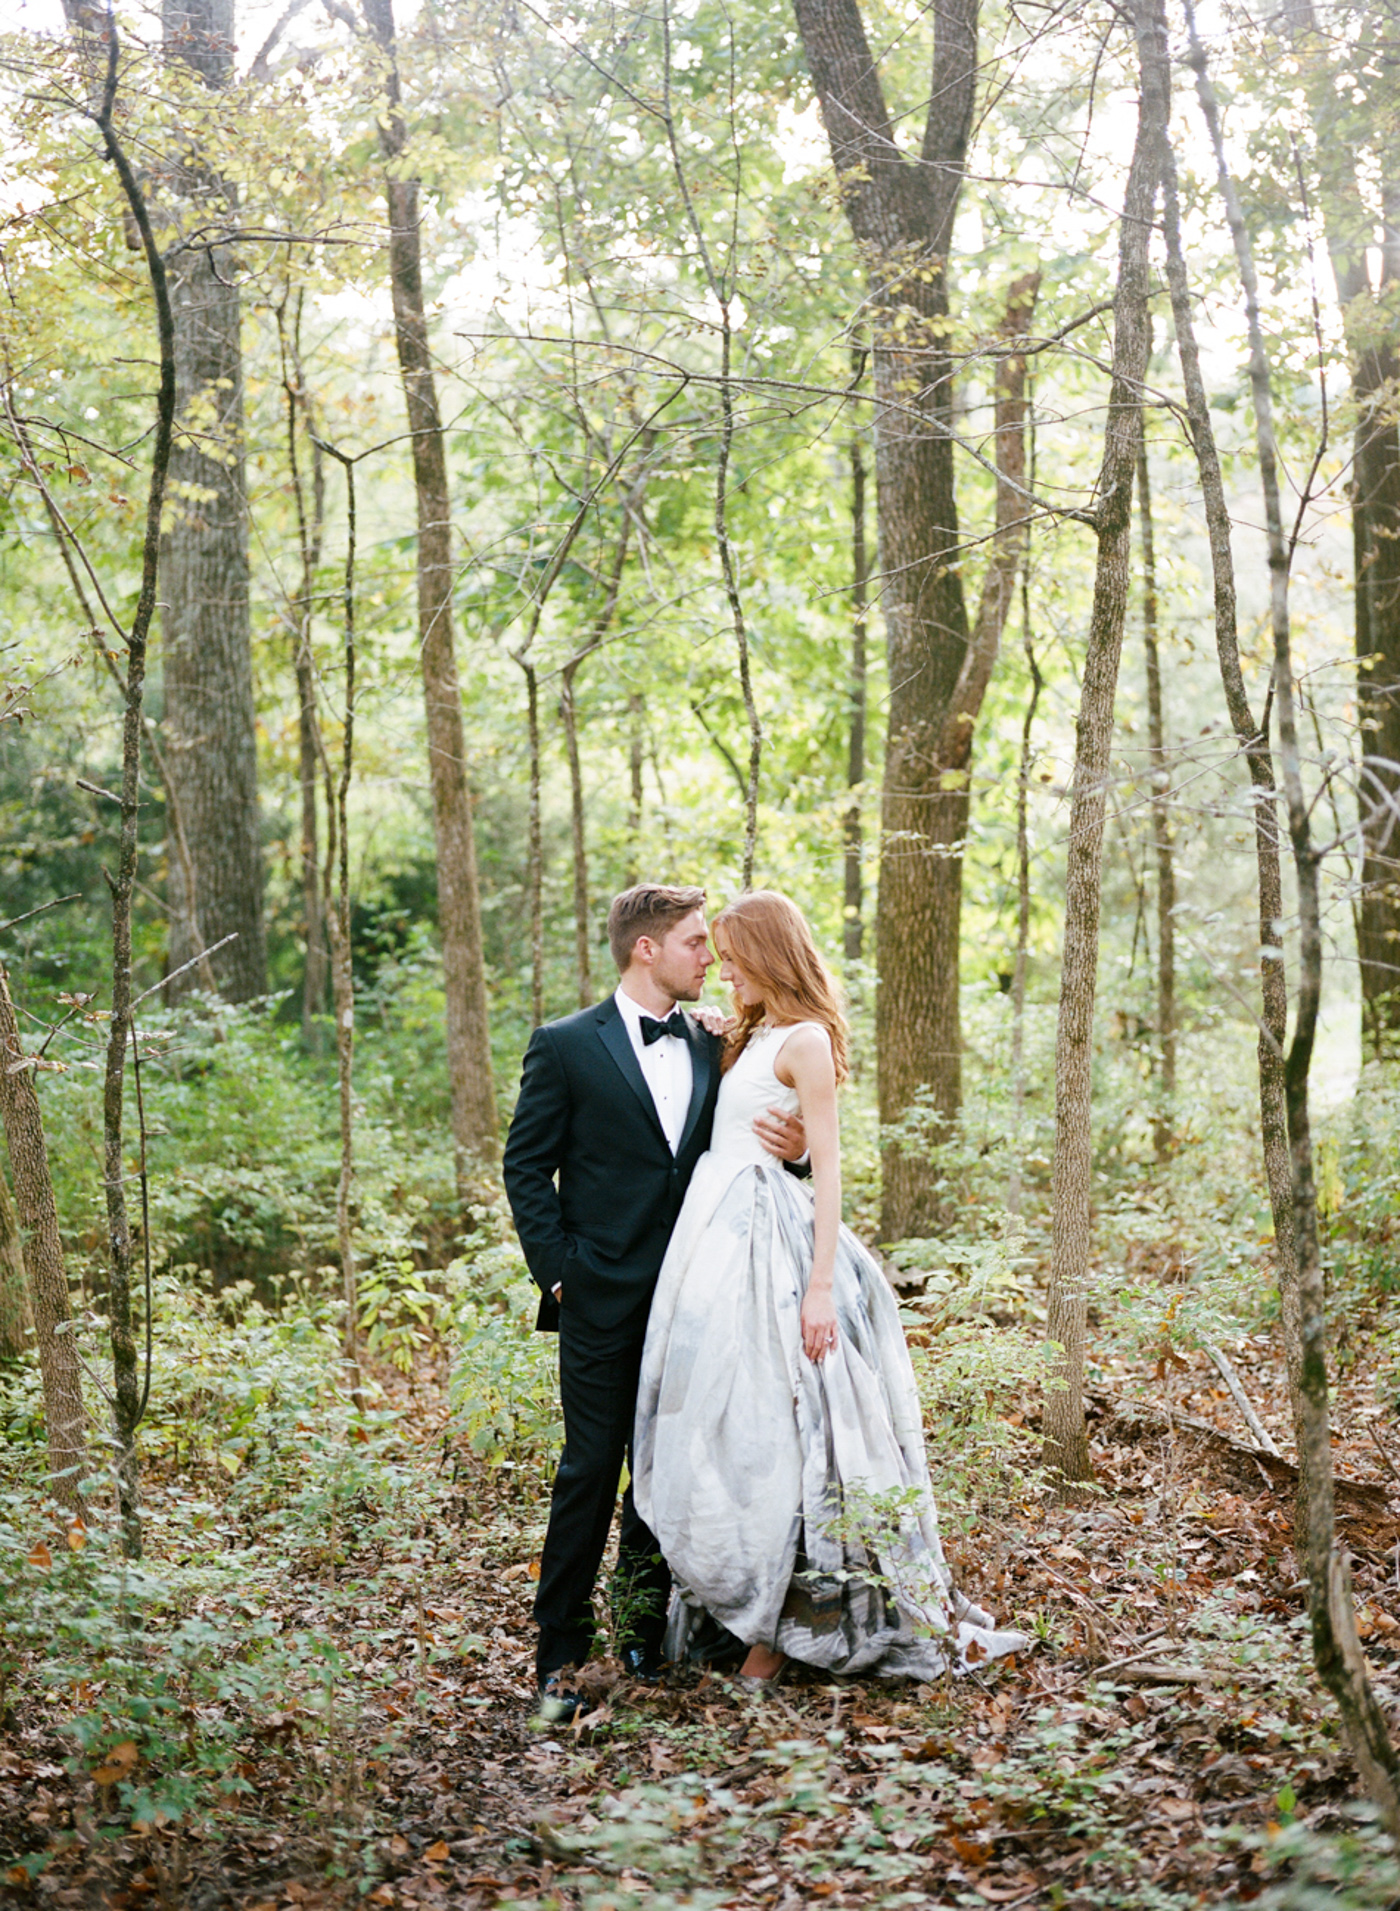 Tennessee wedding location,
Koby Brown Photography, Tennessee Wedding Photographer,
Rachel and Johnny